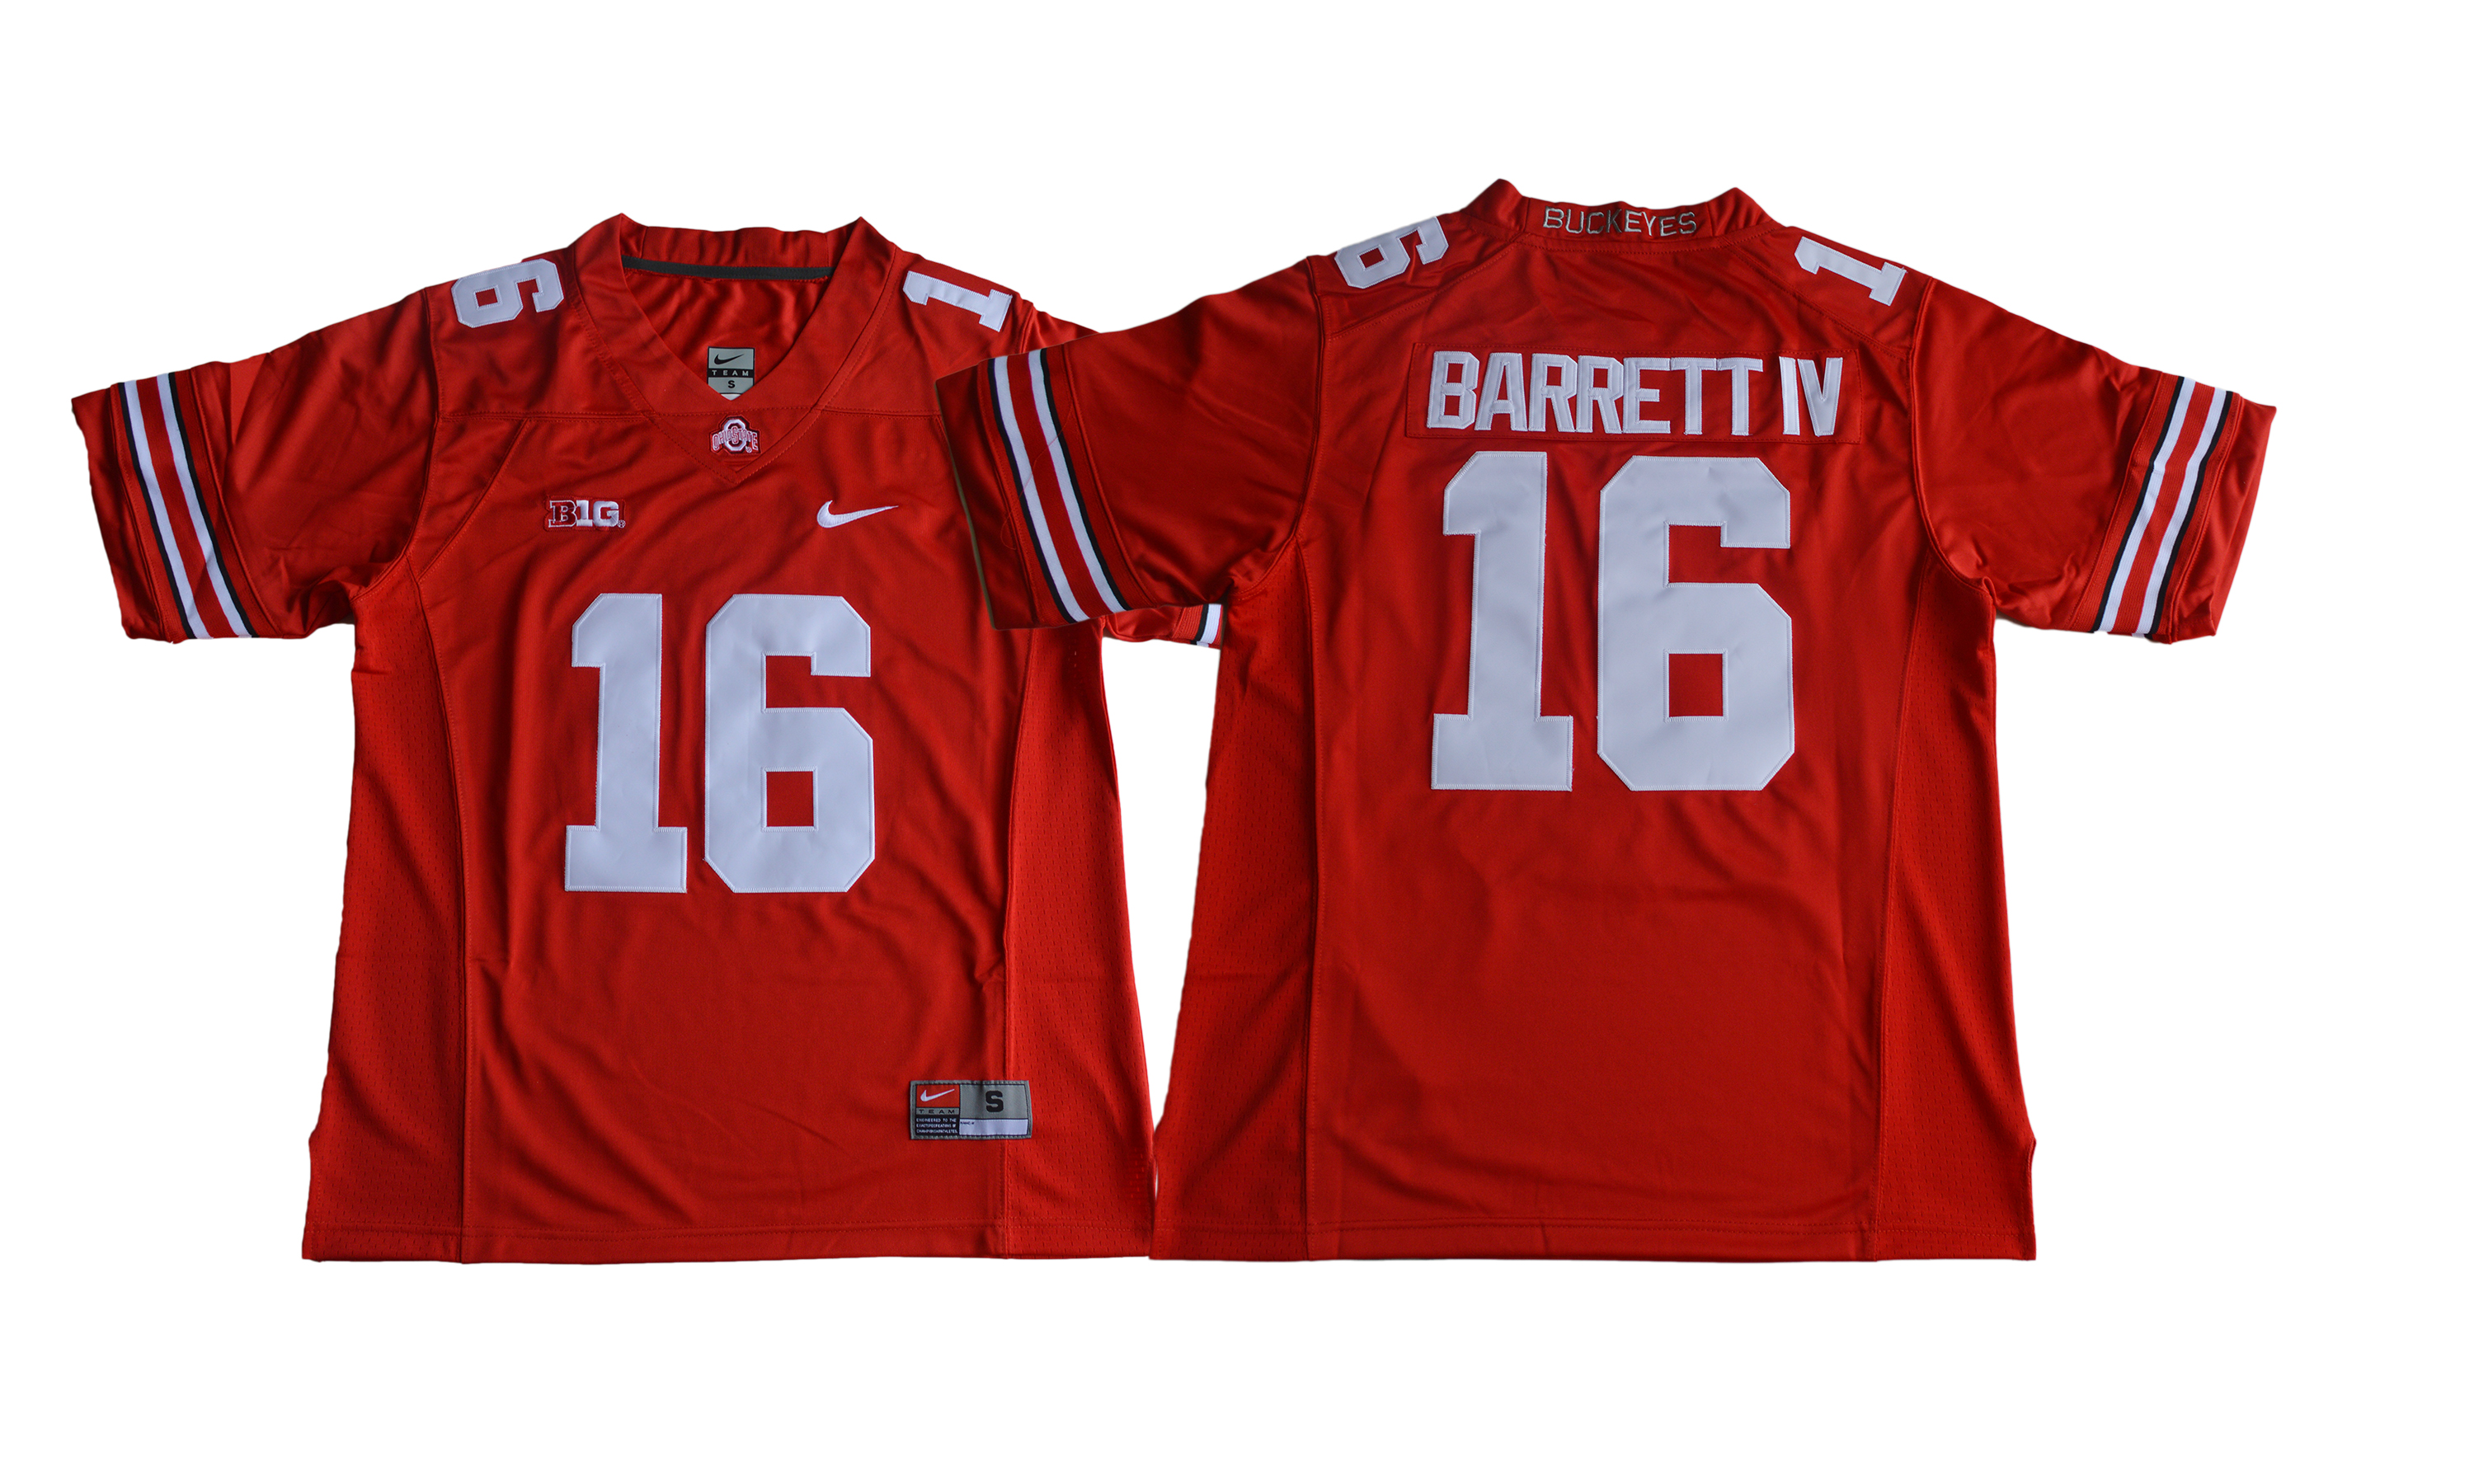 Men's Ohio State Buckeyes #16 J.T. Barrett IV Red Limited Stitched NCAA 2016 Nike College Football Jersey